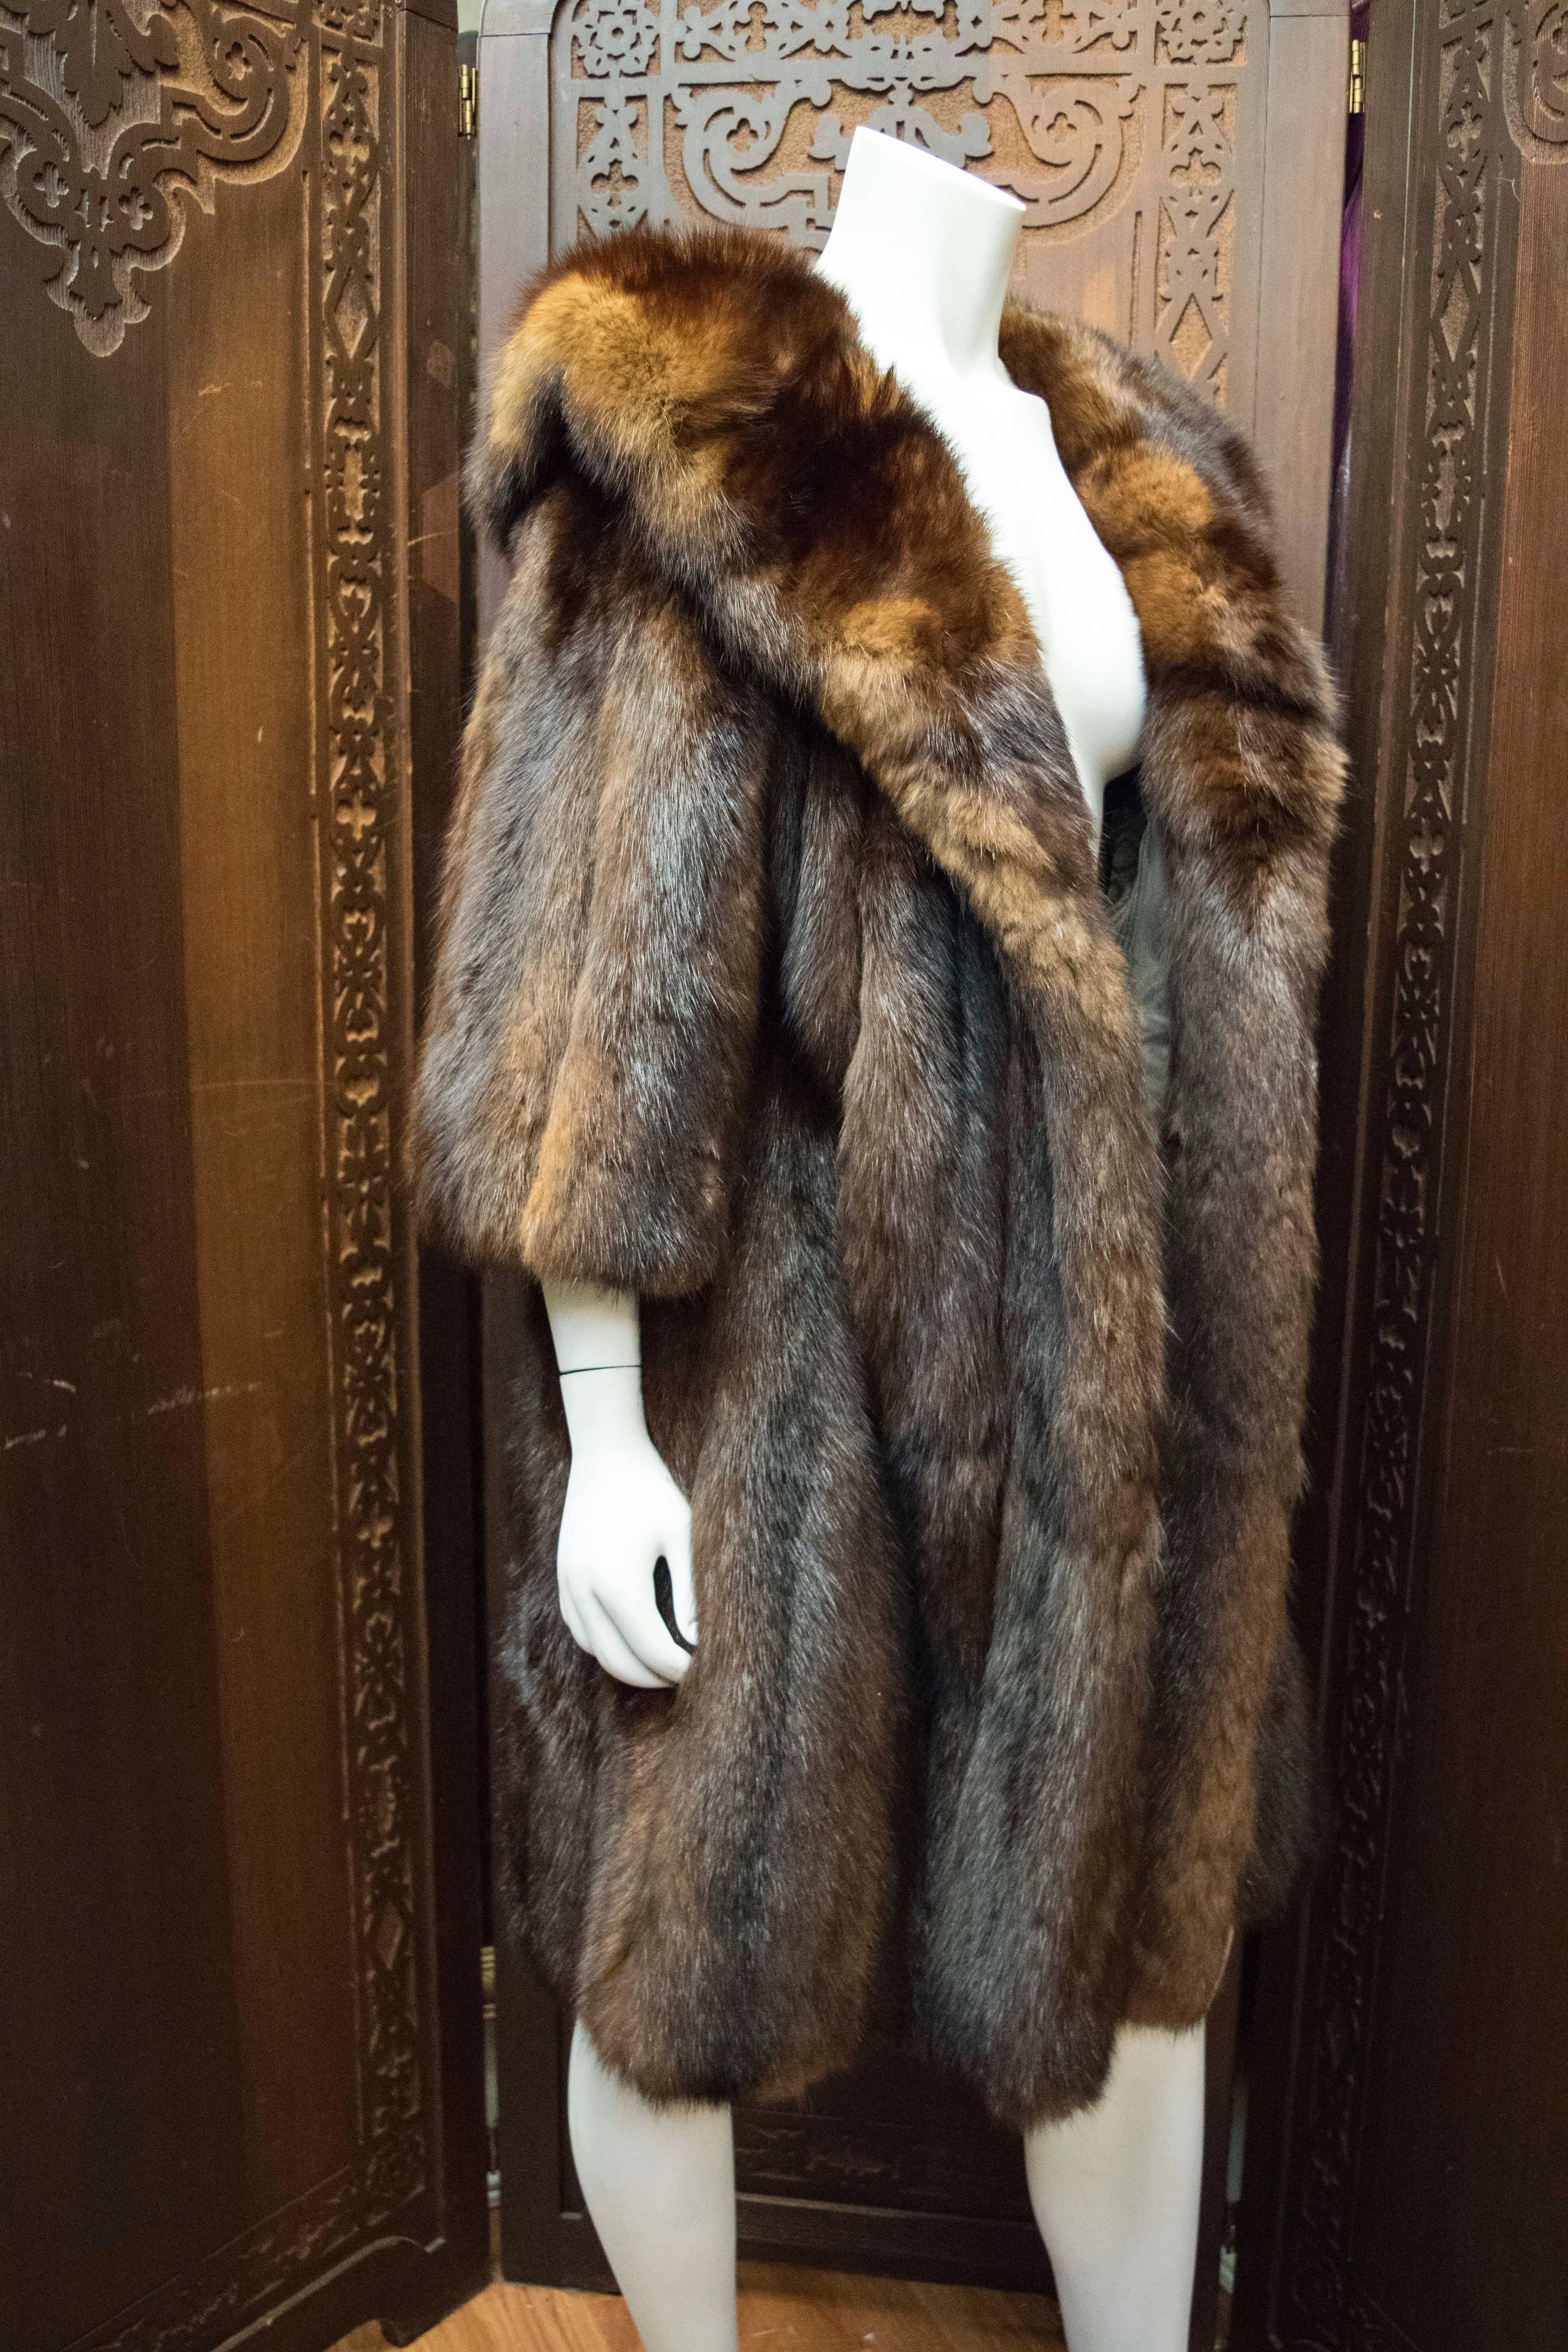 1950s Sable Fur Evening Coat

This piece does not have fur hooks or closure.

B 44
W 42
H 46
L 39